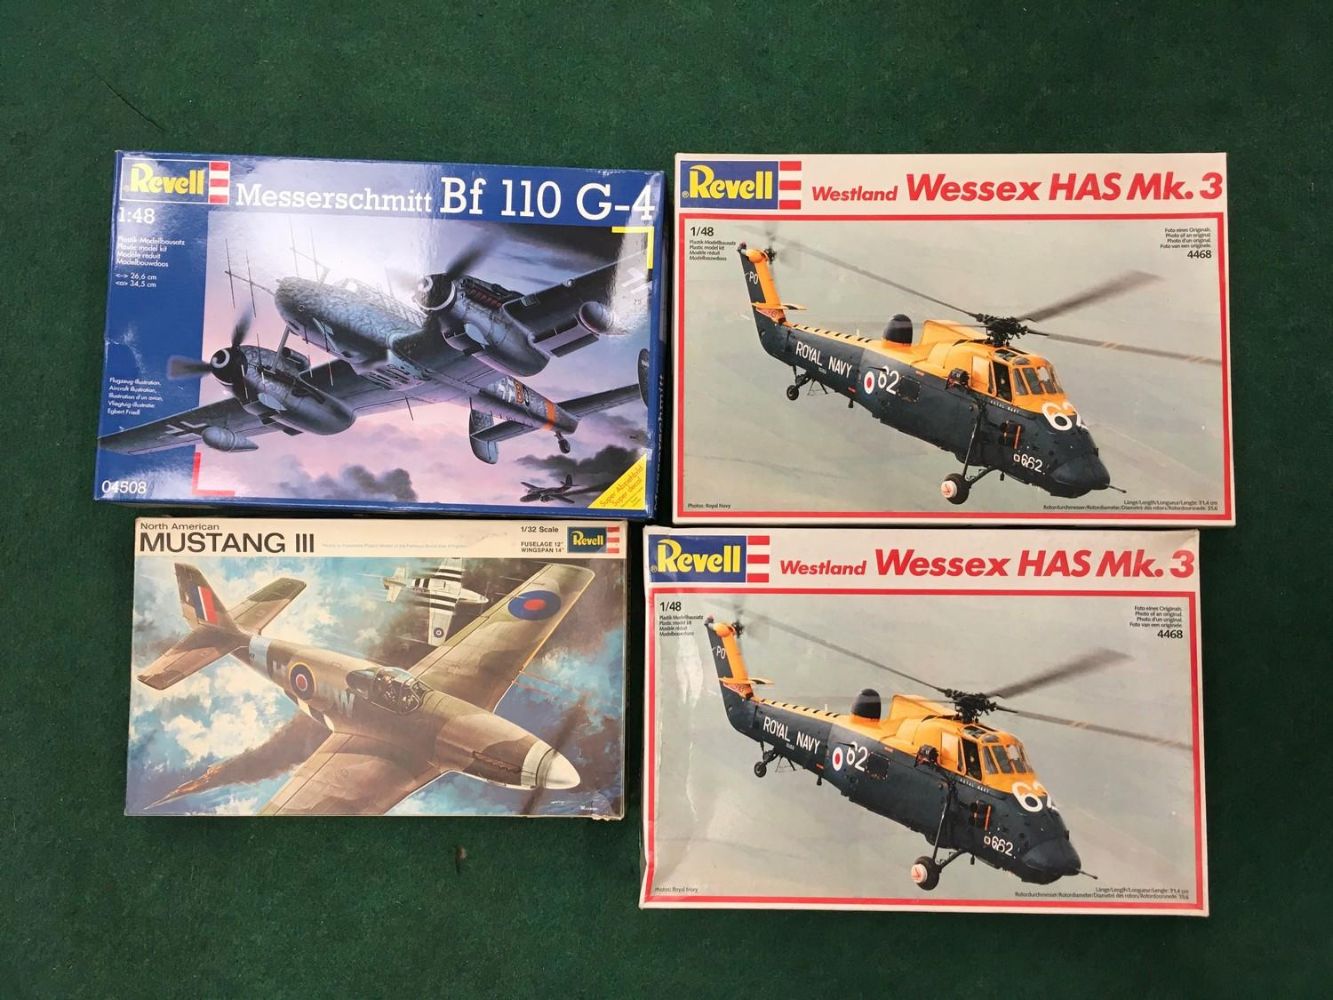 Toy Auction - NO RESERVES containing over 200 lots of plastic model kits, Corgi The Aviaition Archive models, N Gauge, Gauge 1 and other toys.